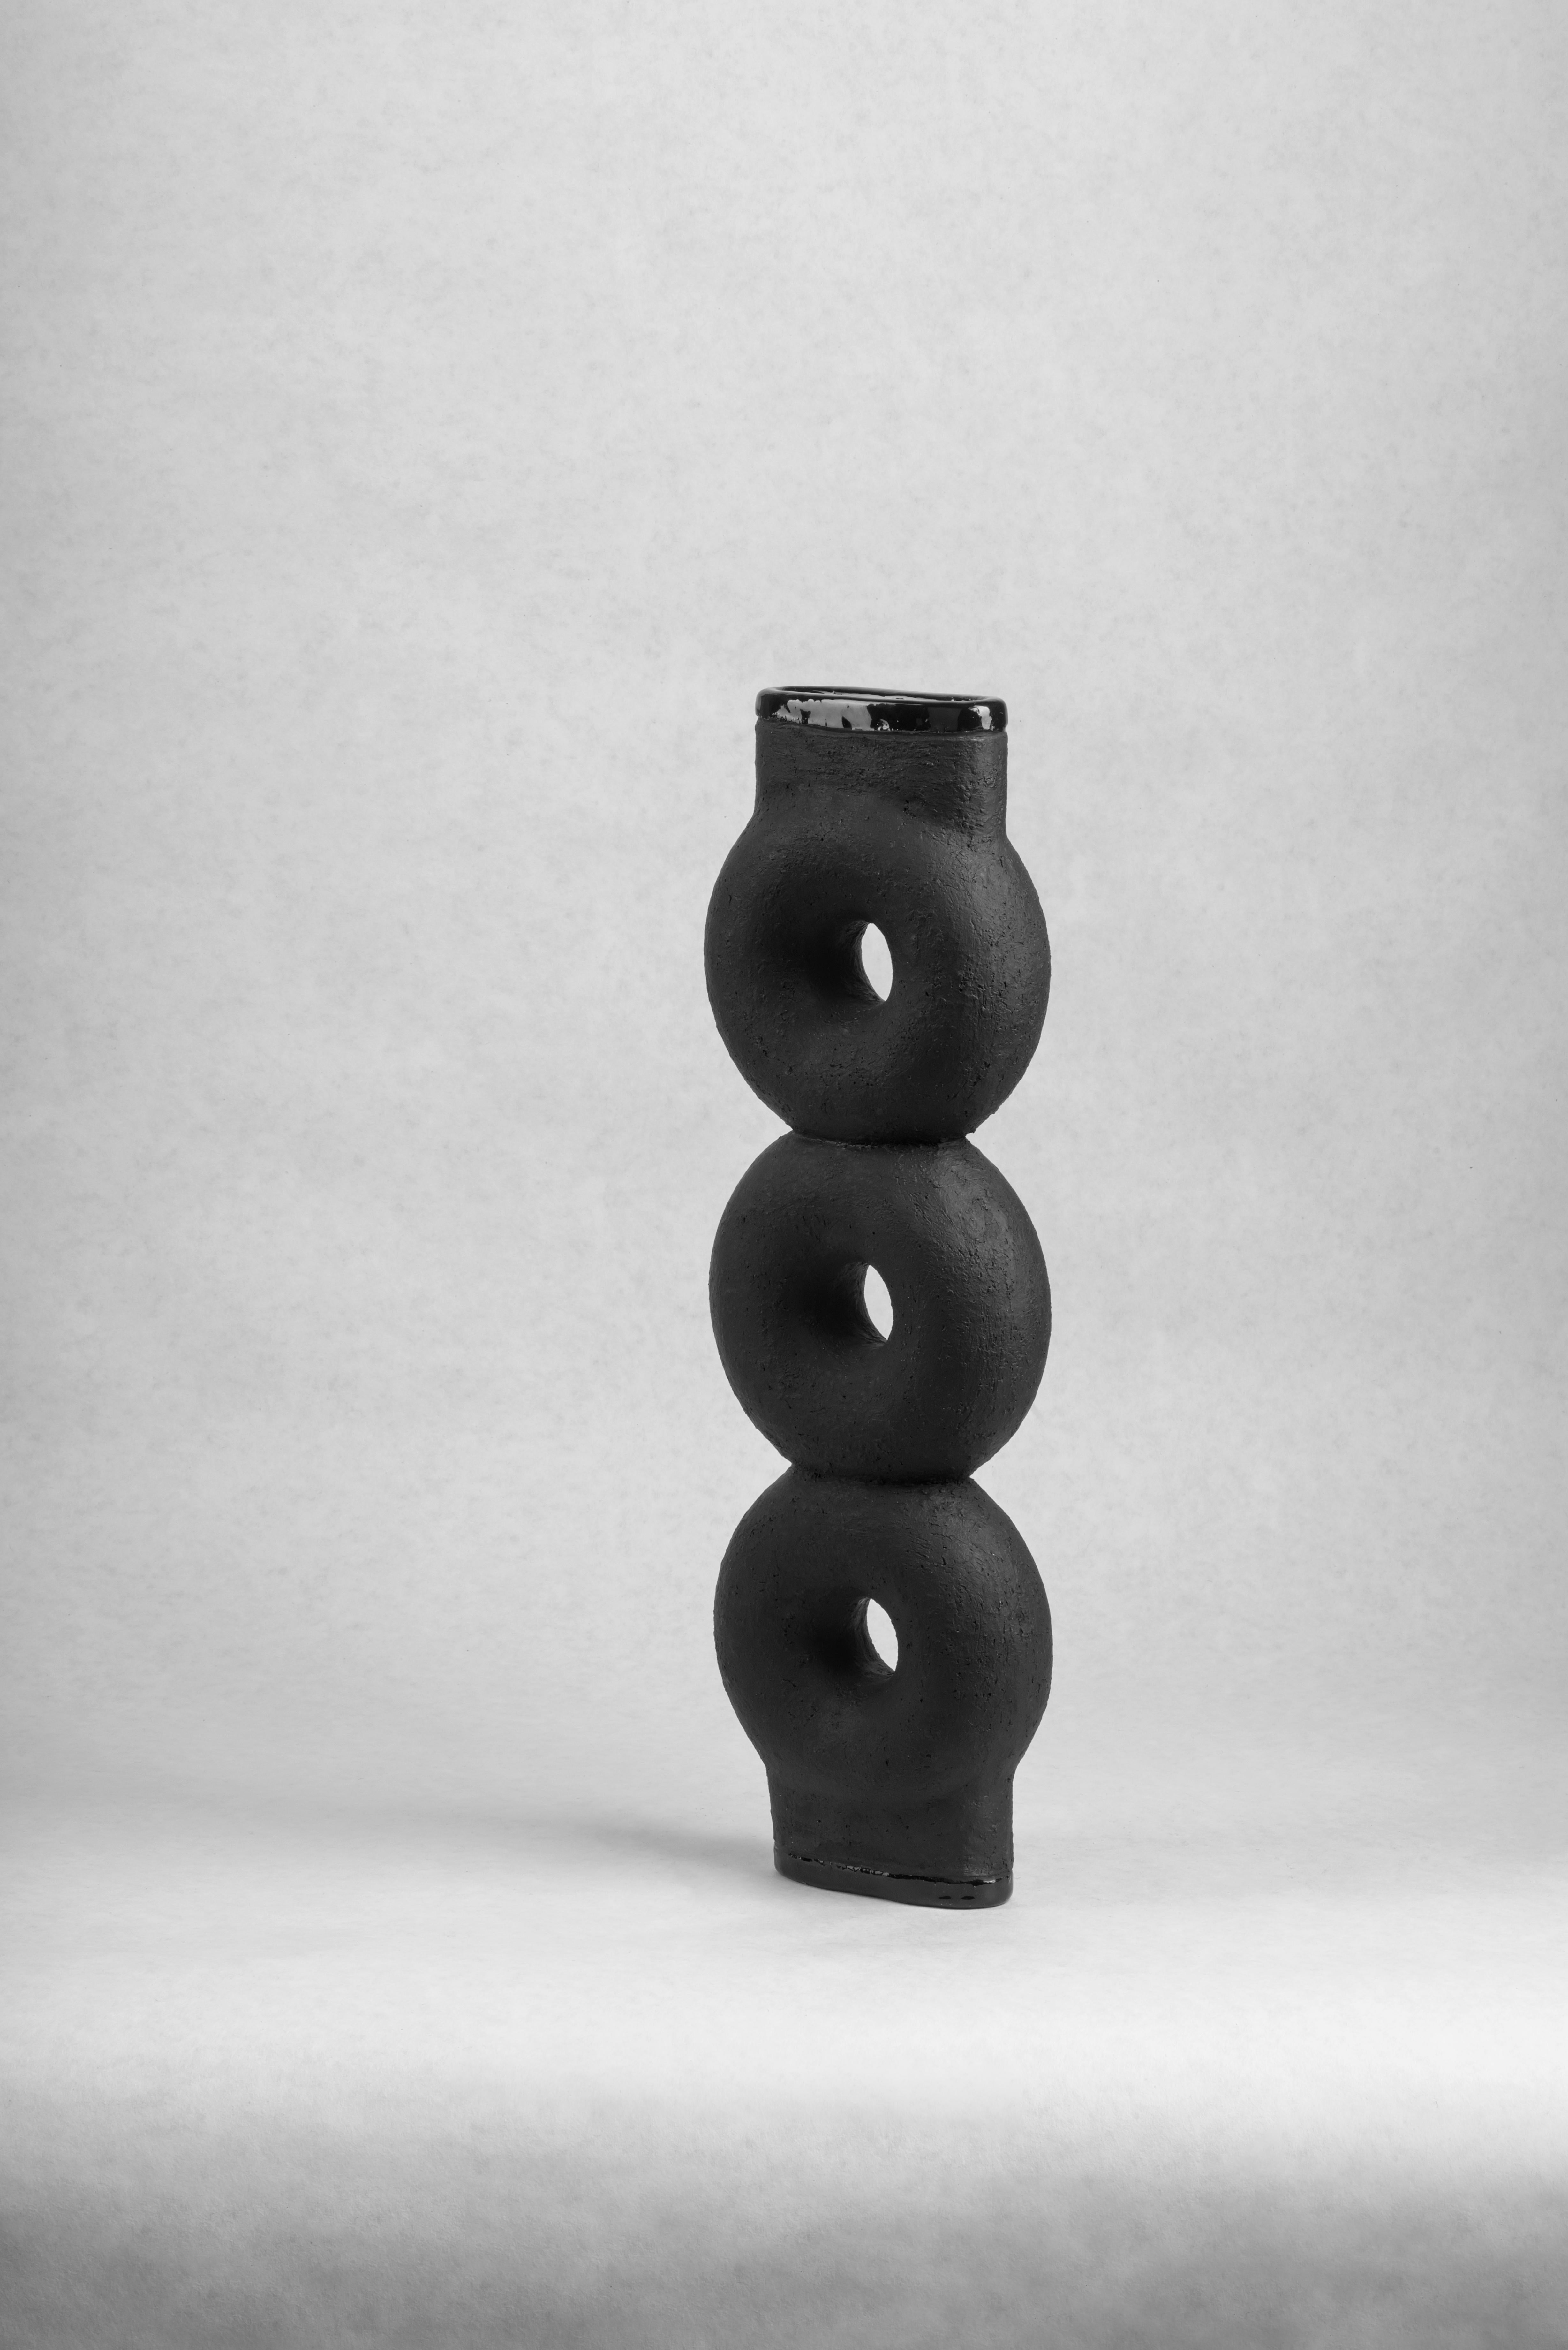 Pair of sculpted ceramic vase by FAINA
Design: Victoriya Yakusha
Material: Material: clay / ceramics
Dimensions: 14 x 5 x H 43.5 cm


The vase is part of a series of 5 vases, the set of vases consists of :

1. Vase on three legs height 500 x width